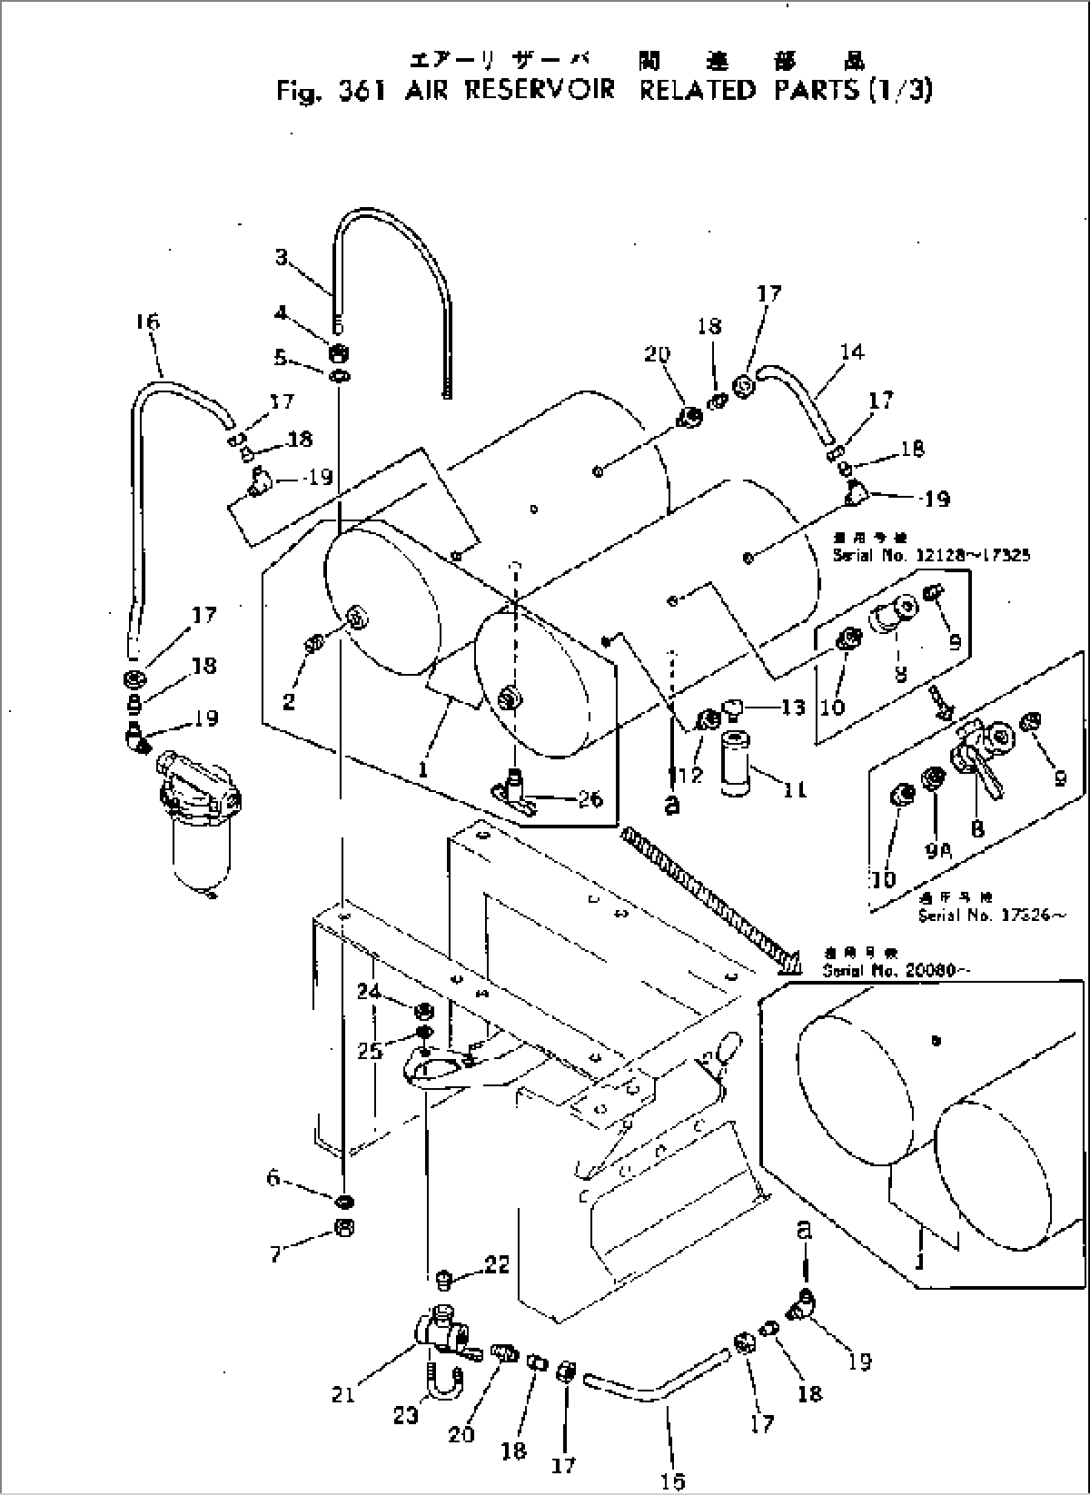 AIR RESERVOIR AND RELATED PARTS (1/3)